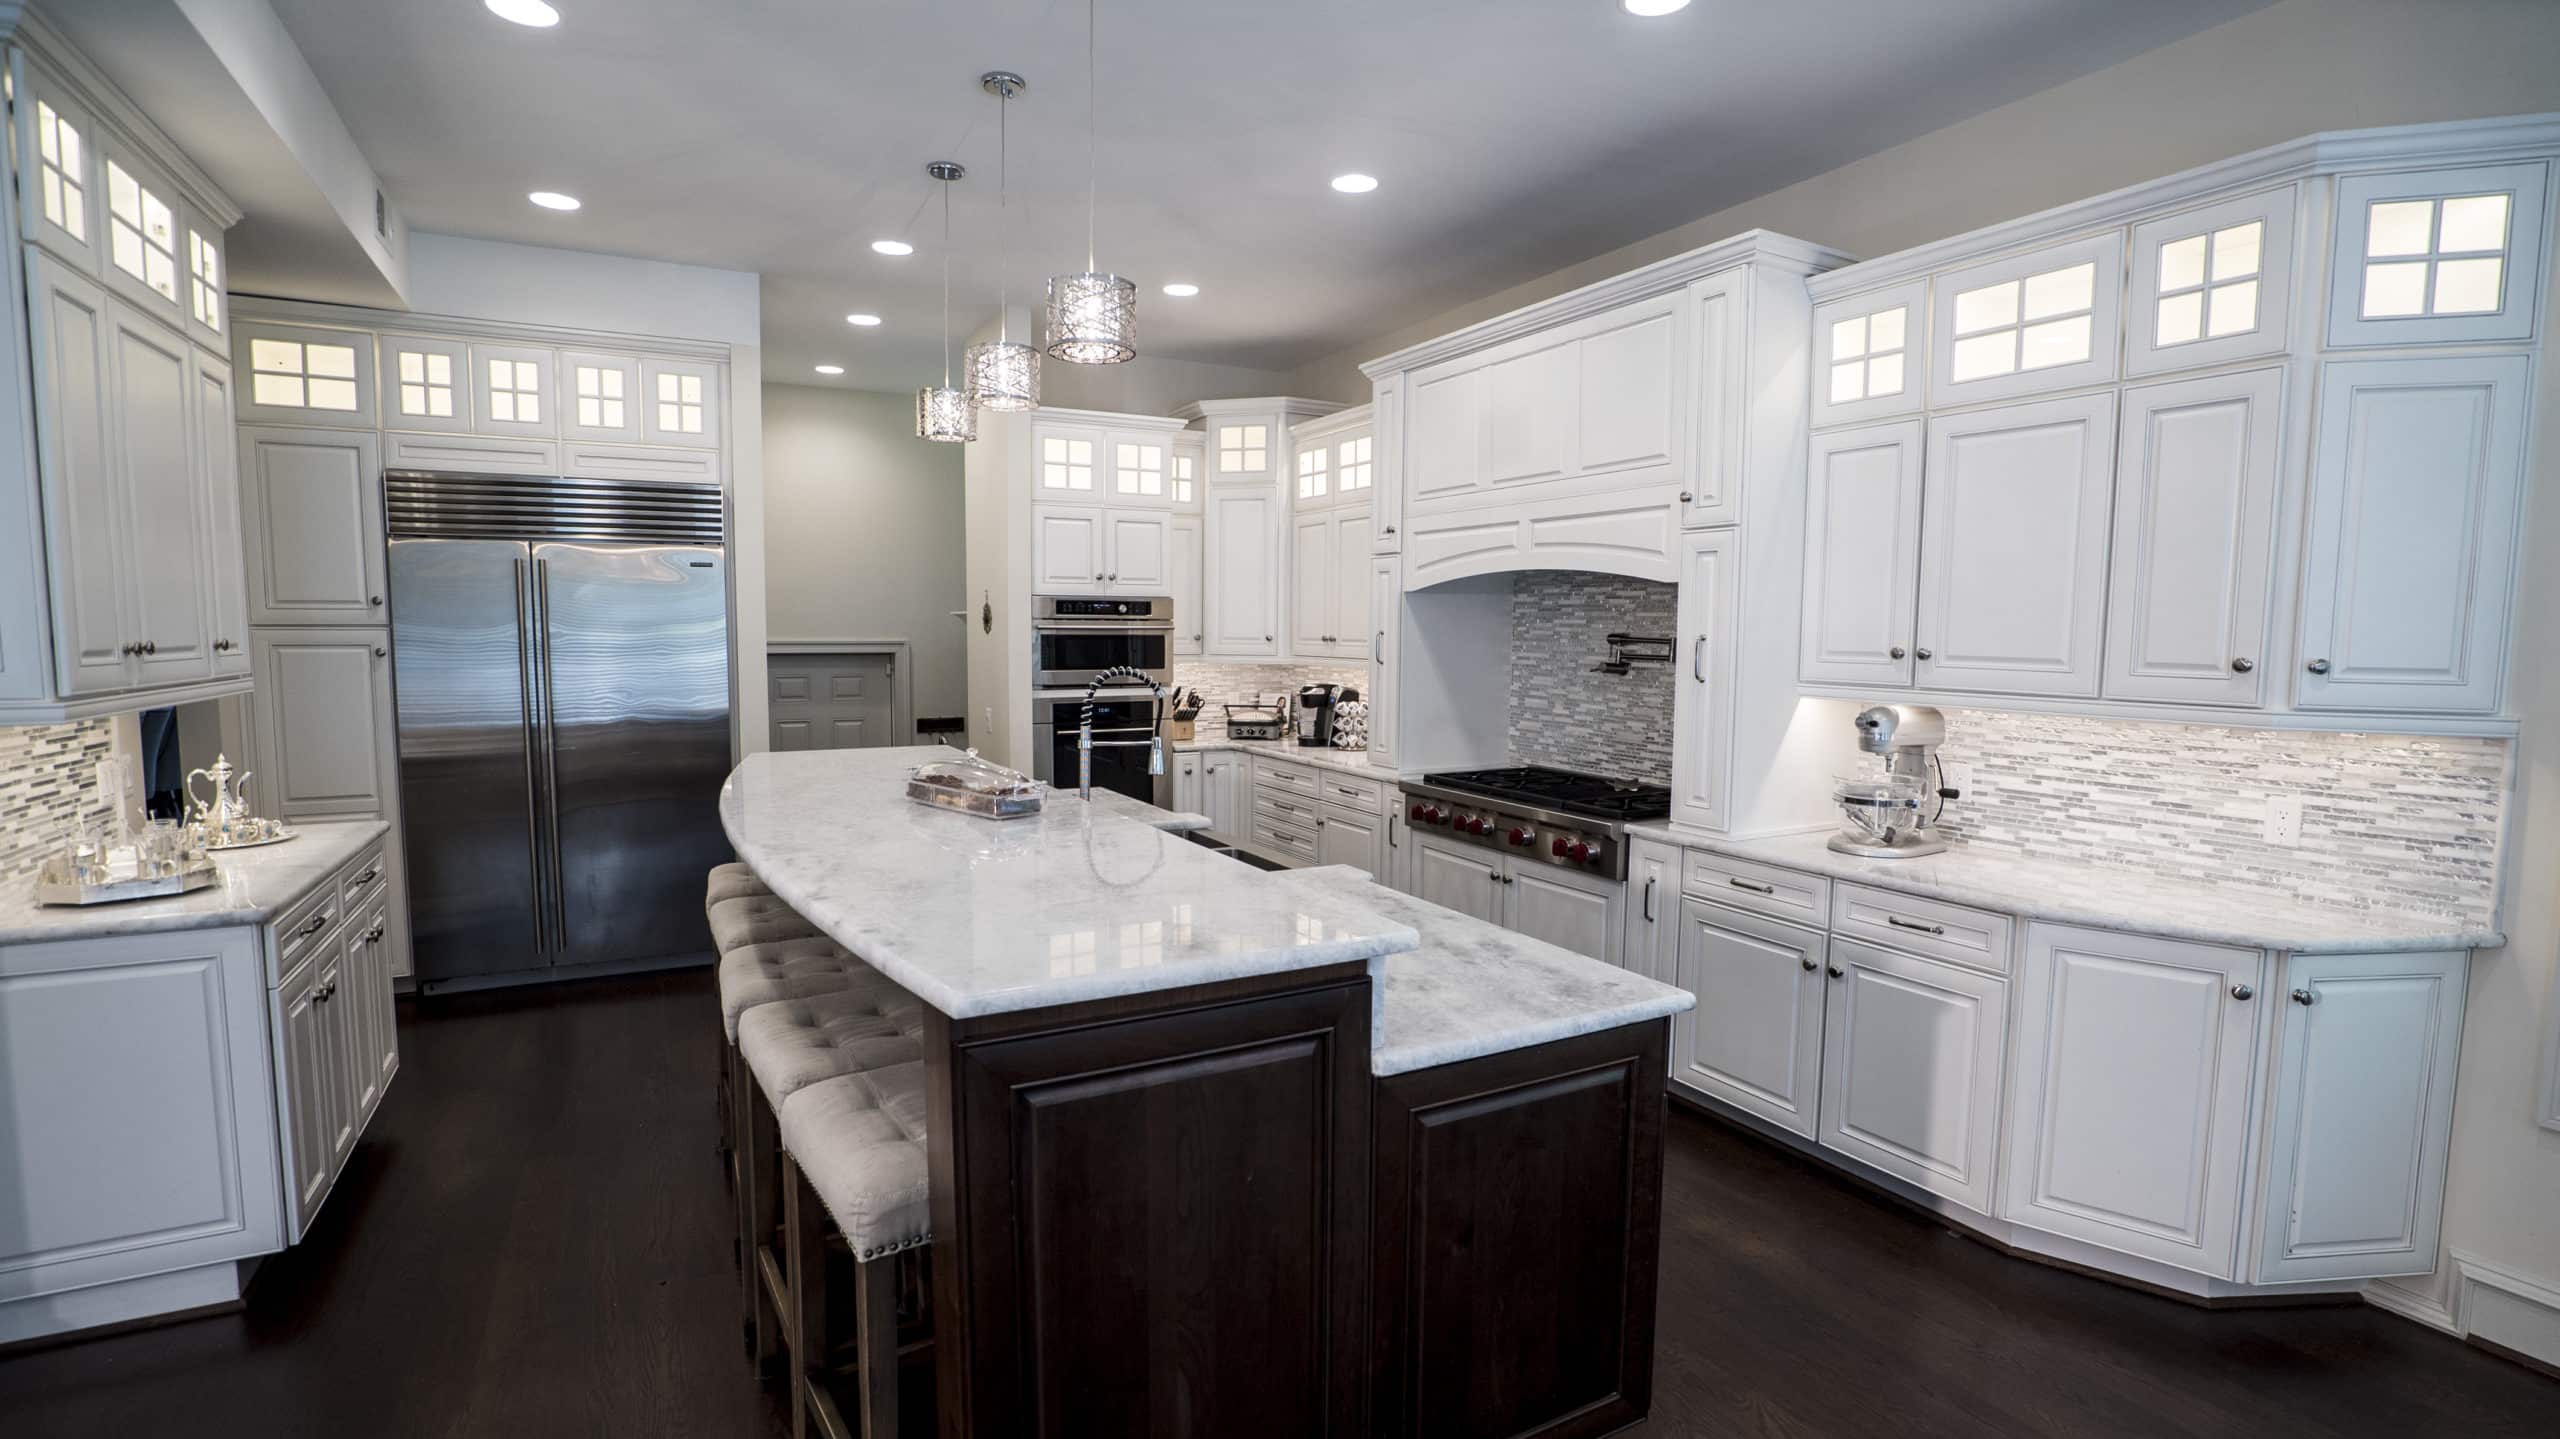 A spacious kitchen with white cabinets and a central island